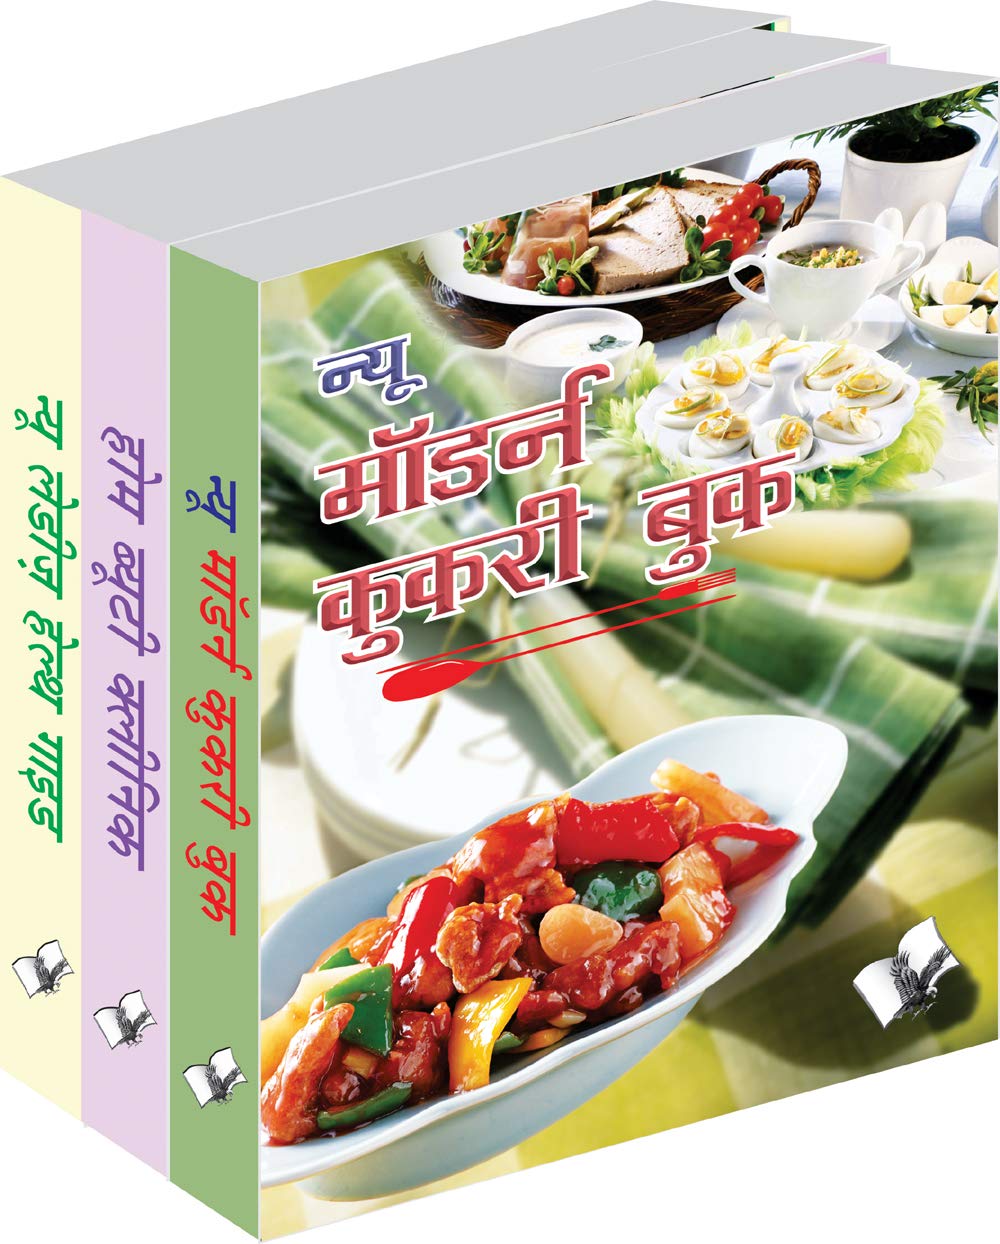 Mahilopayogi Value Pack (Set of Books on Cookery, Beauty Care and Health for Women)